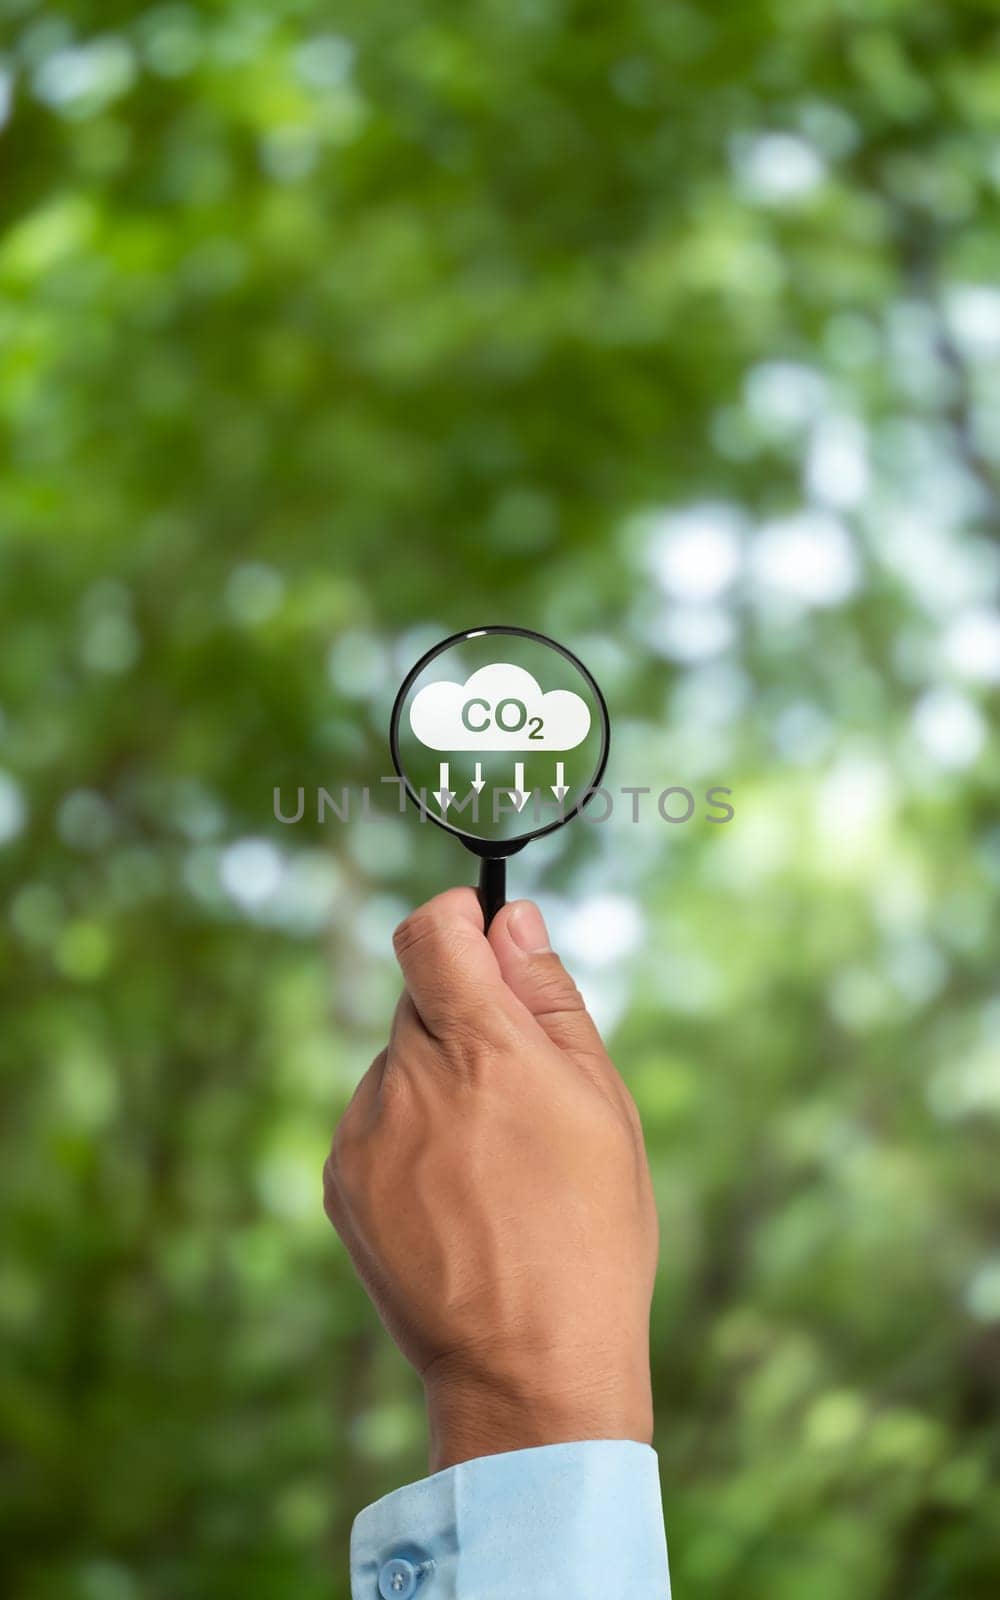 A clean and friendly environment without carbon dioxide emissions, Hand holding magnifying glass with CO2 reduction icon inside, carbon credit to limit global warming from climate change, carbon neutral.